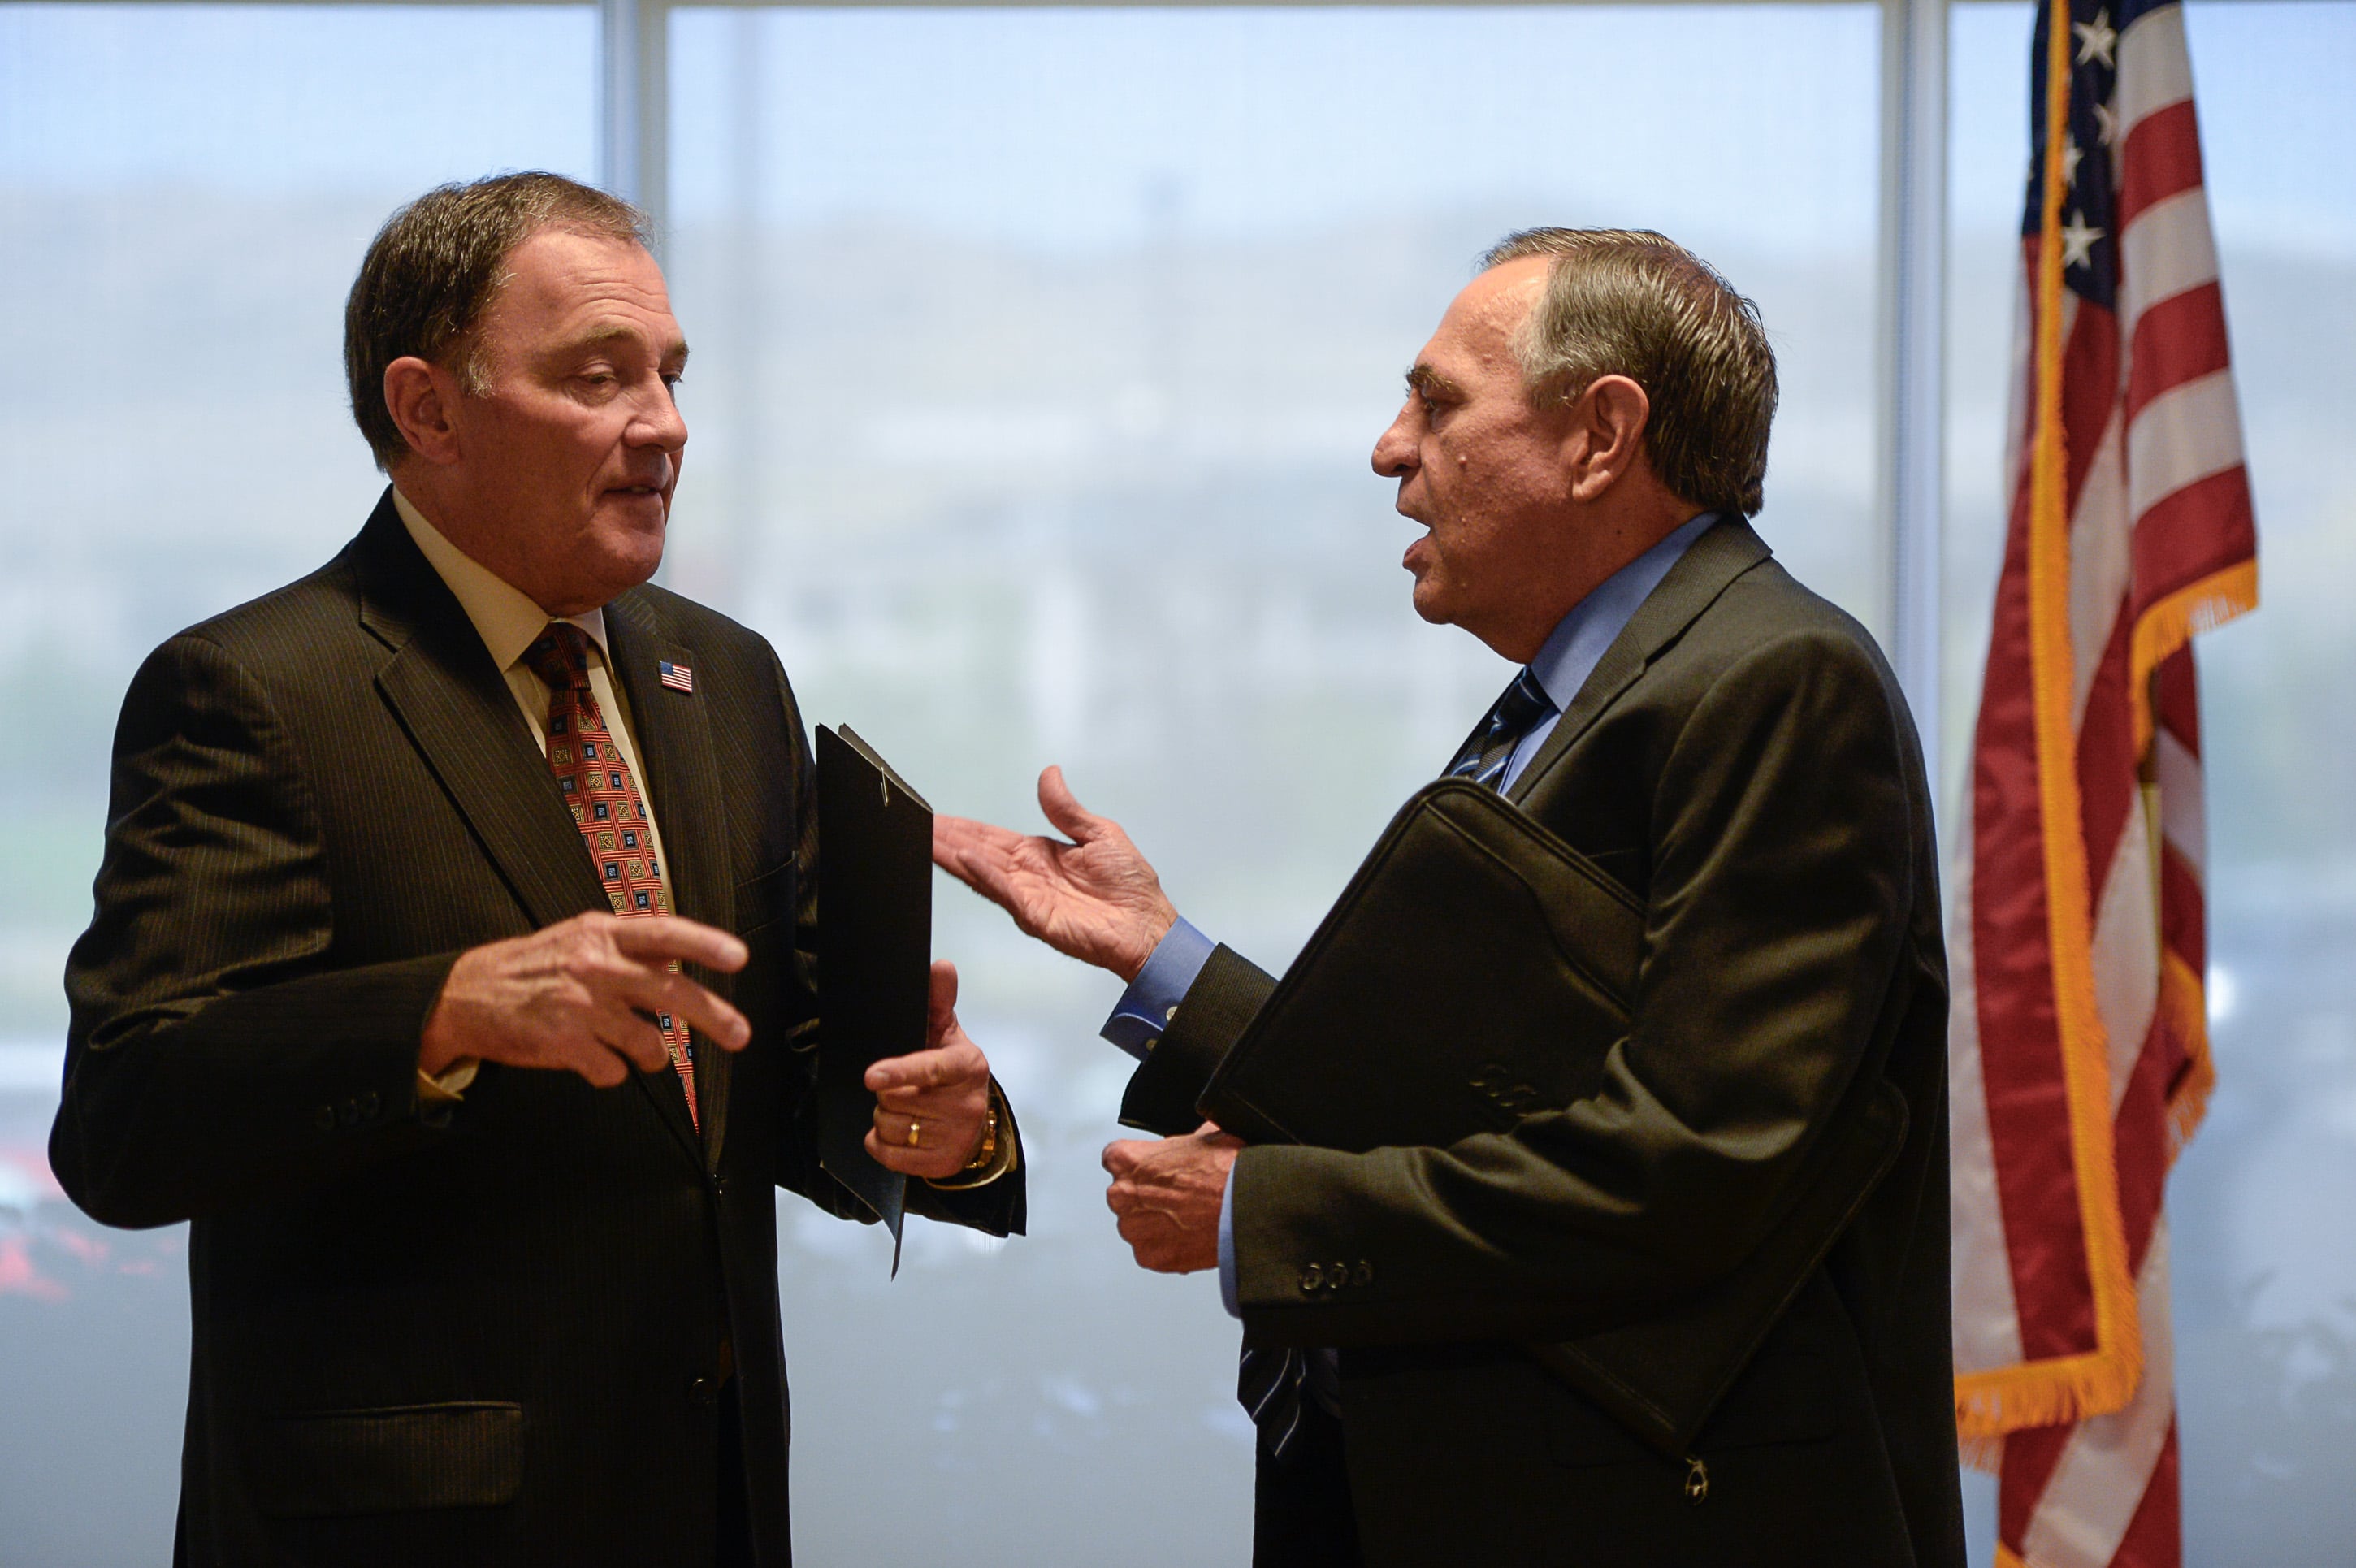 (Francisco Kjolseth | The Salt Lake Tribune) Gov. Gary R. Herbert, speaks with Commissioner of Higher Education Dave Buhler at Silicon Slopes in Lehi following a partnership announcement with IT companies and education to create a pathway program to fill workforce needs in the stateÕs tech industry.